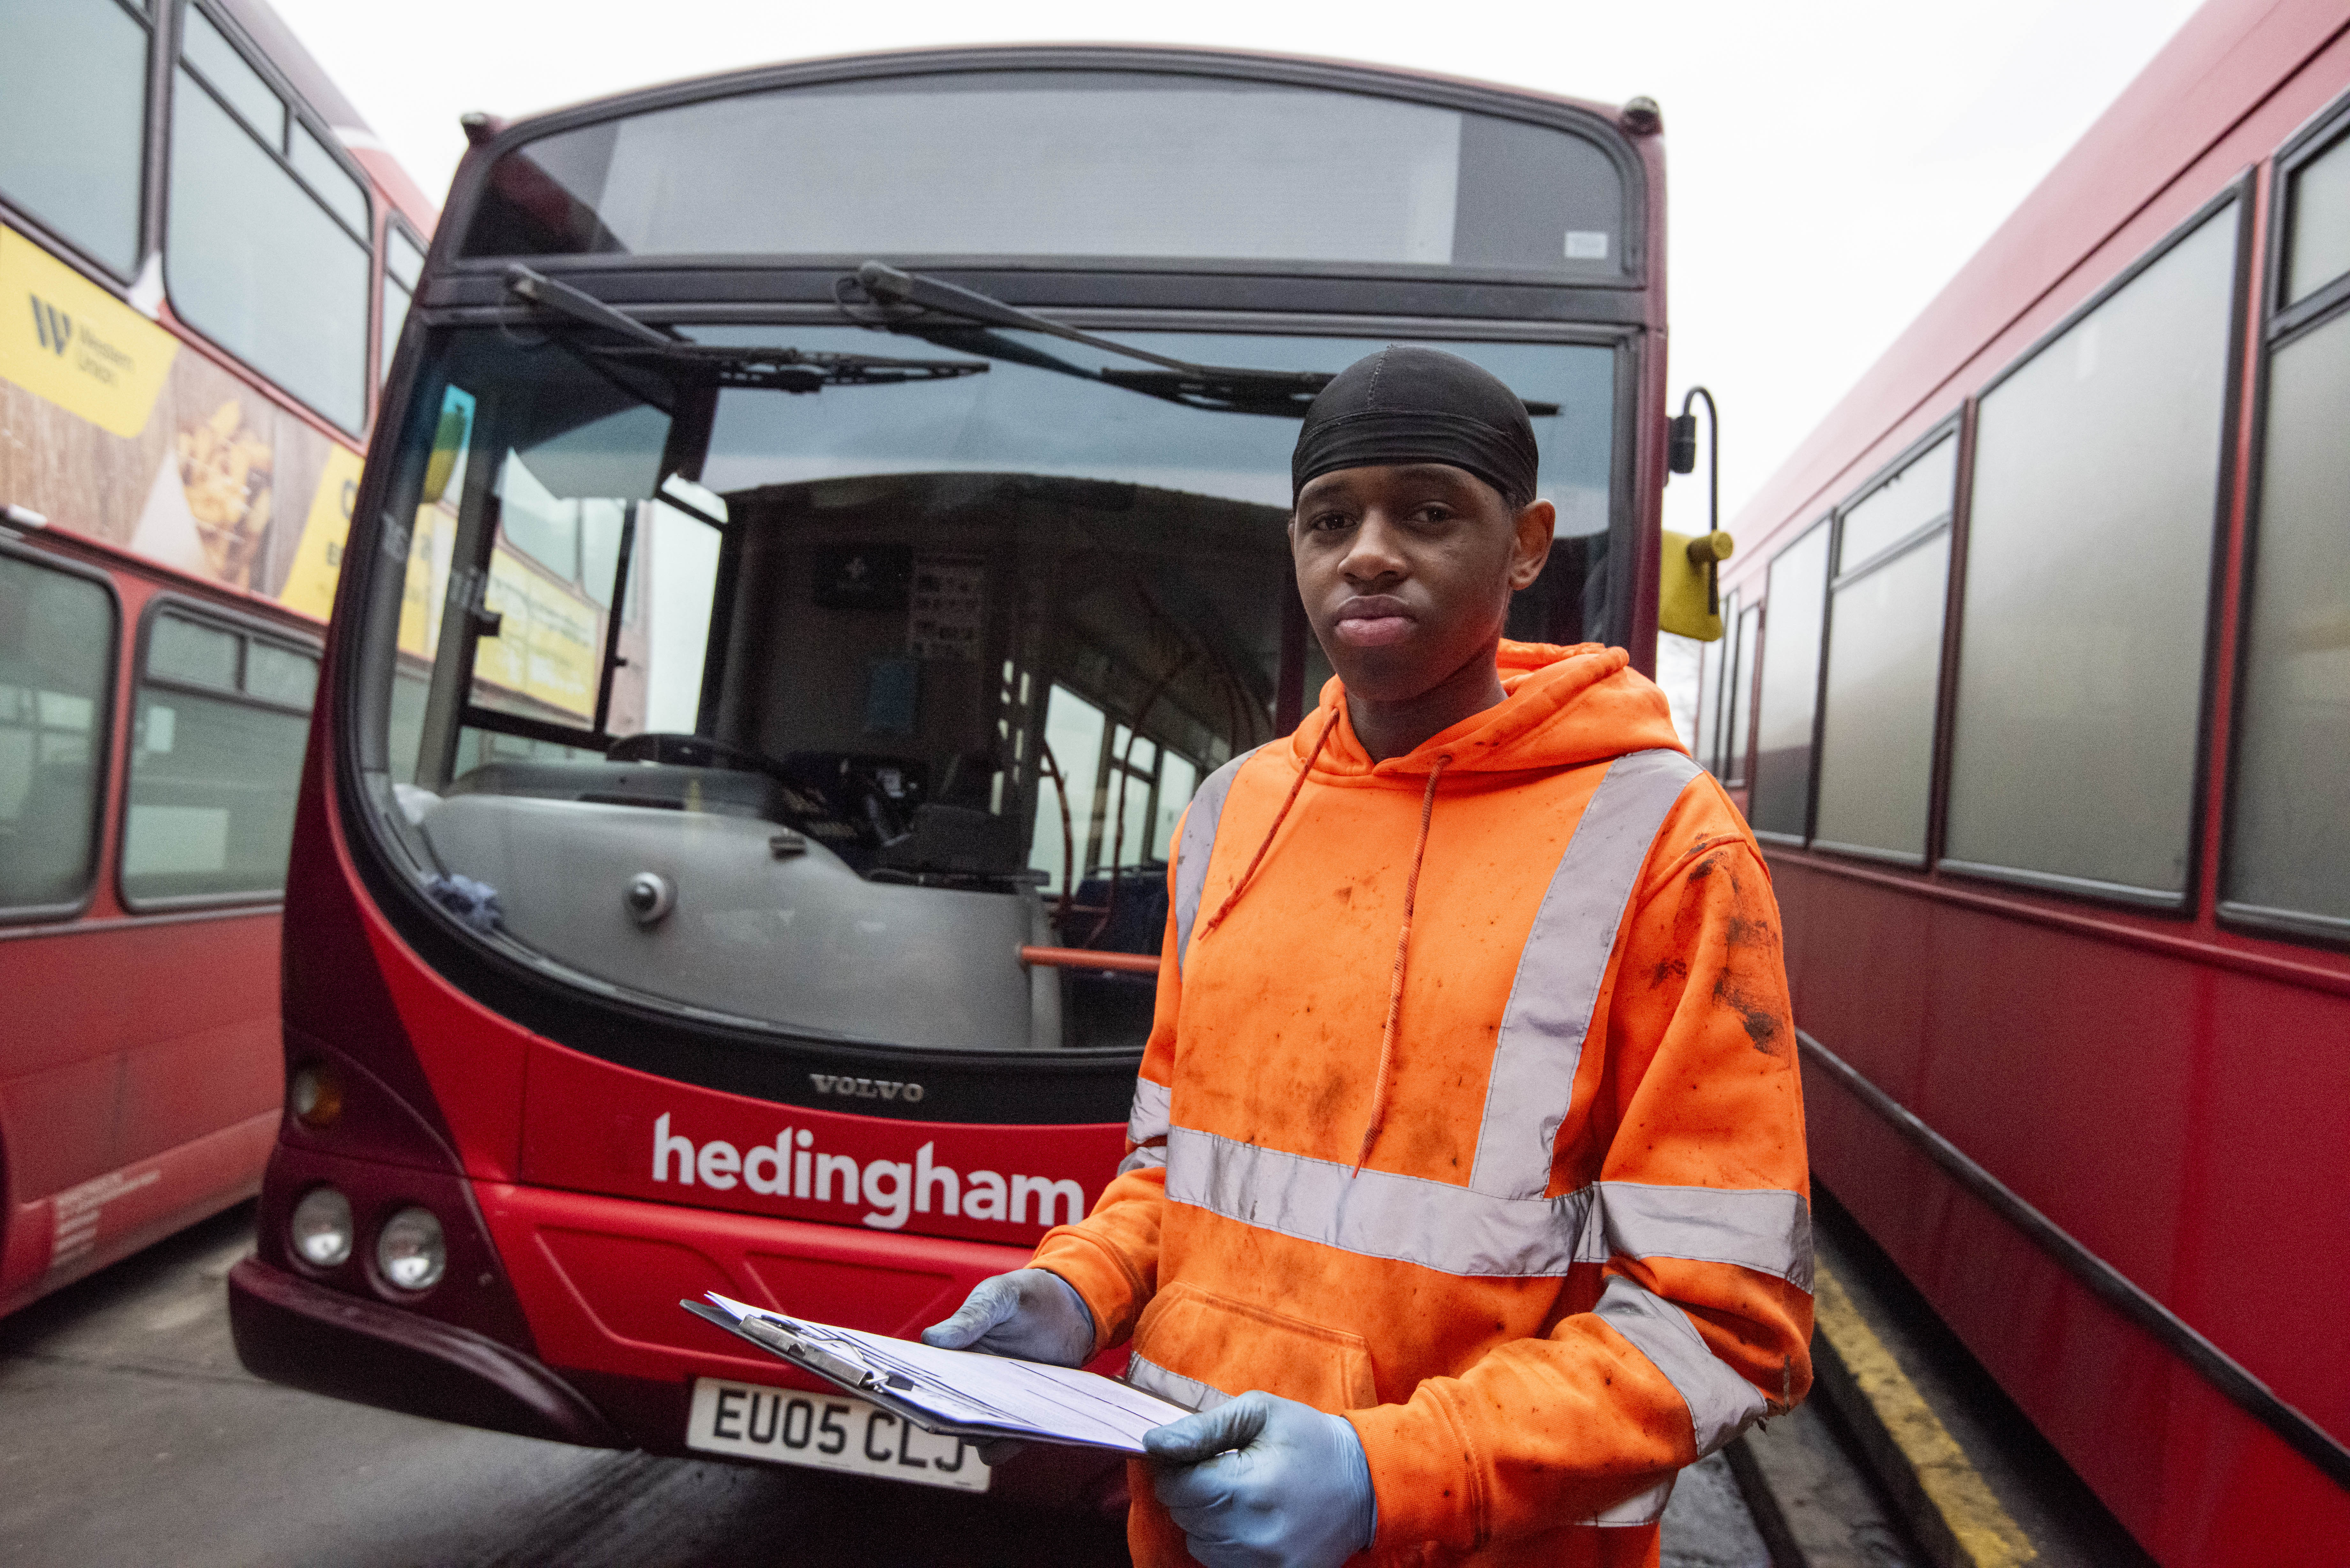 LeVaughn in front of a Hedingham and Chambers Bus